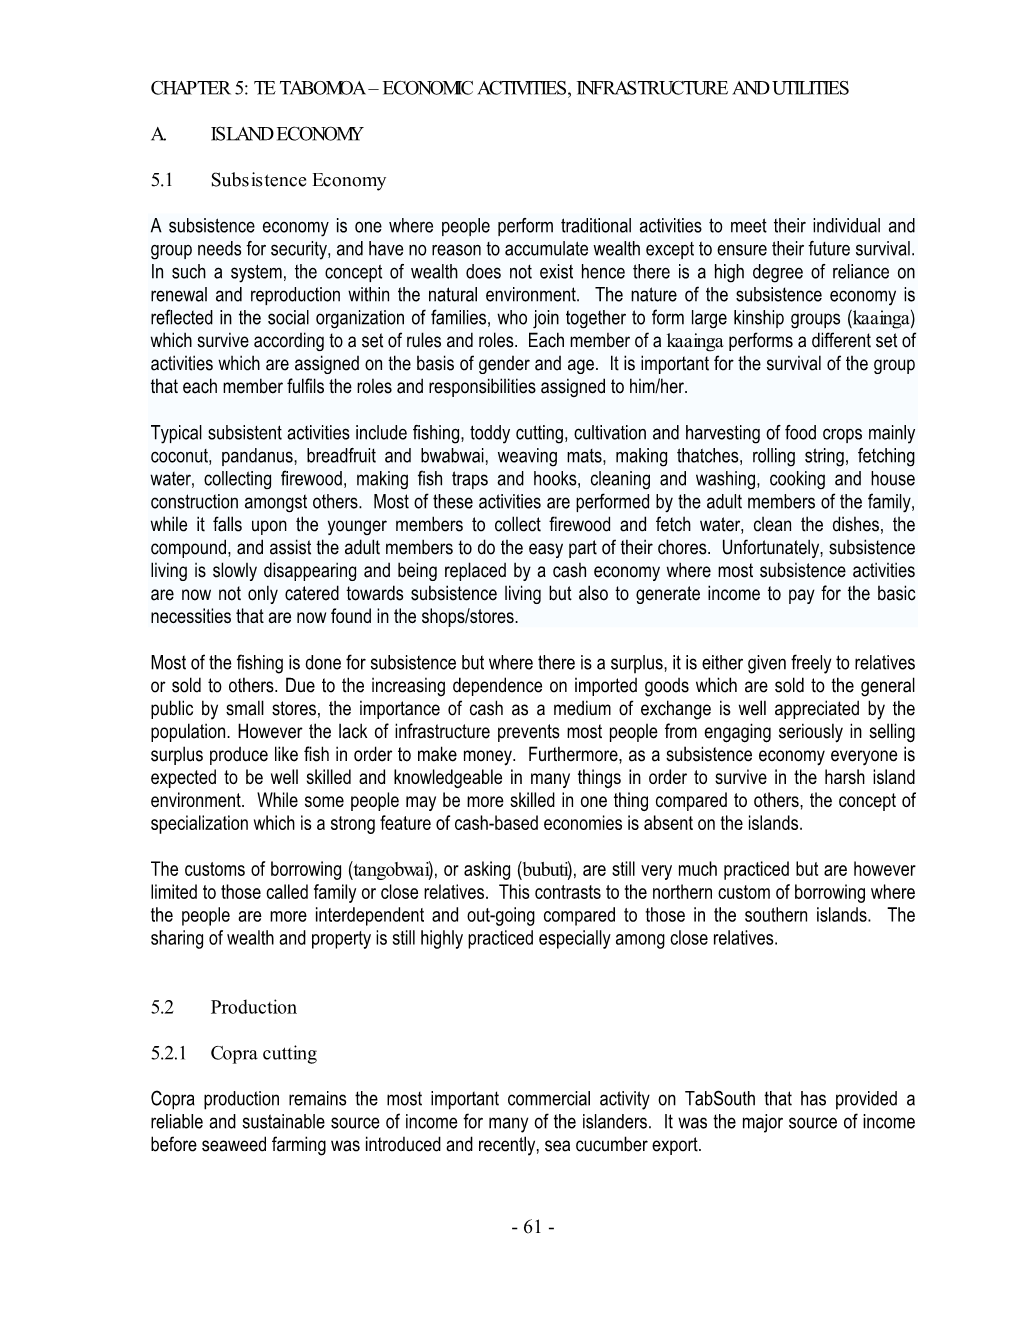 Tabiteuea South Social and Economic Report 2008 3 of 3